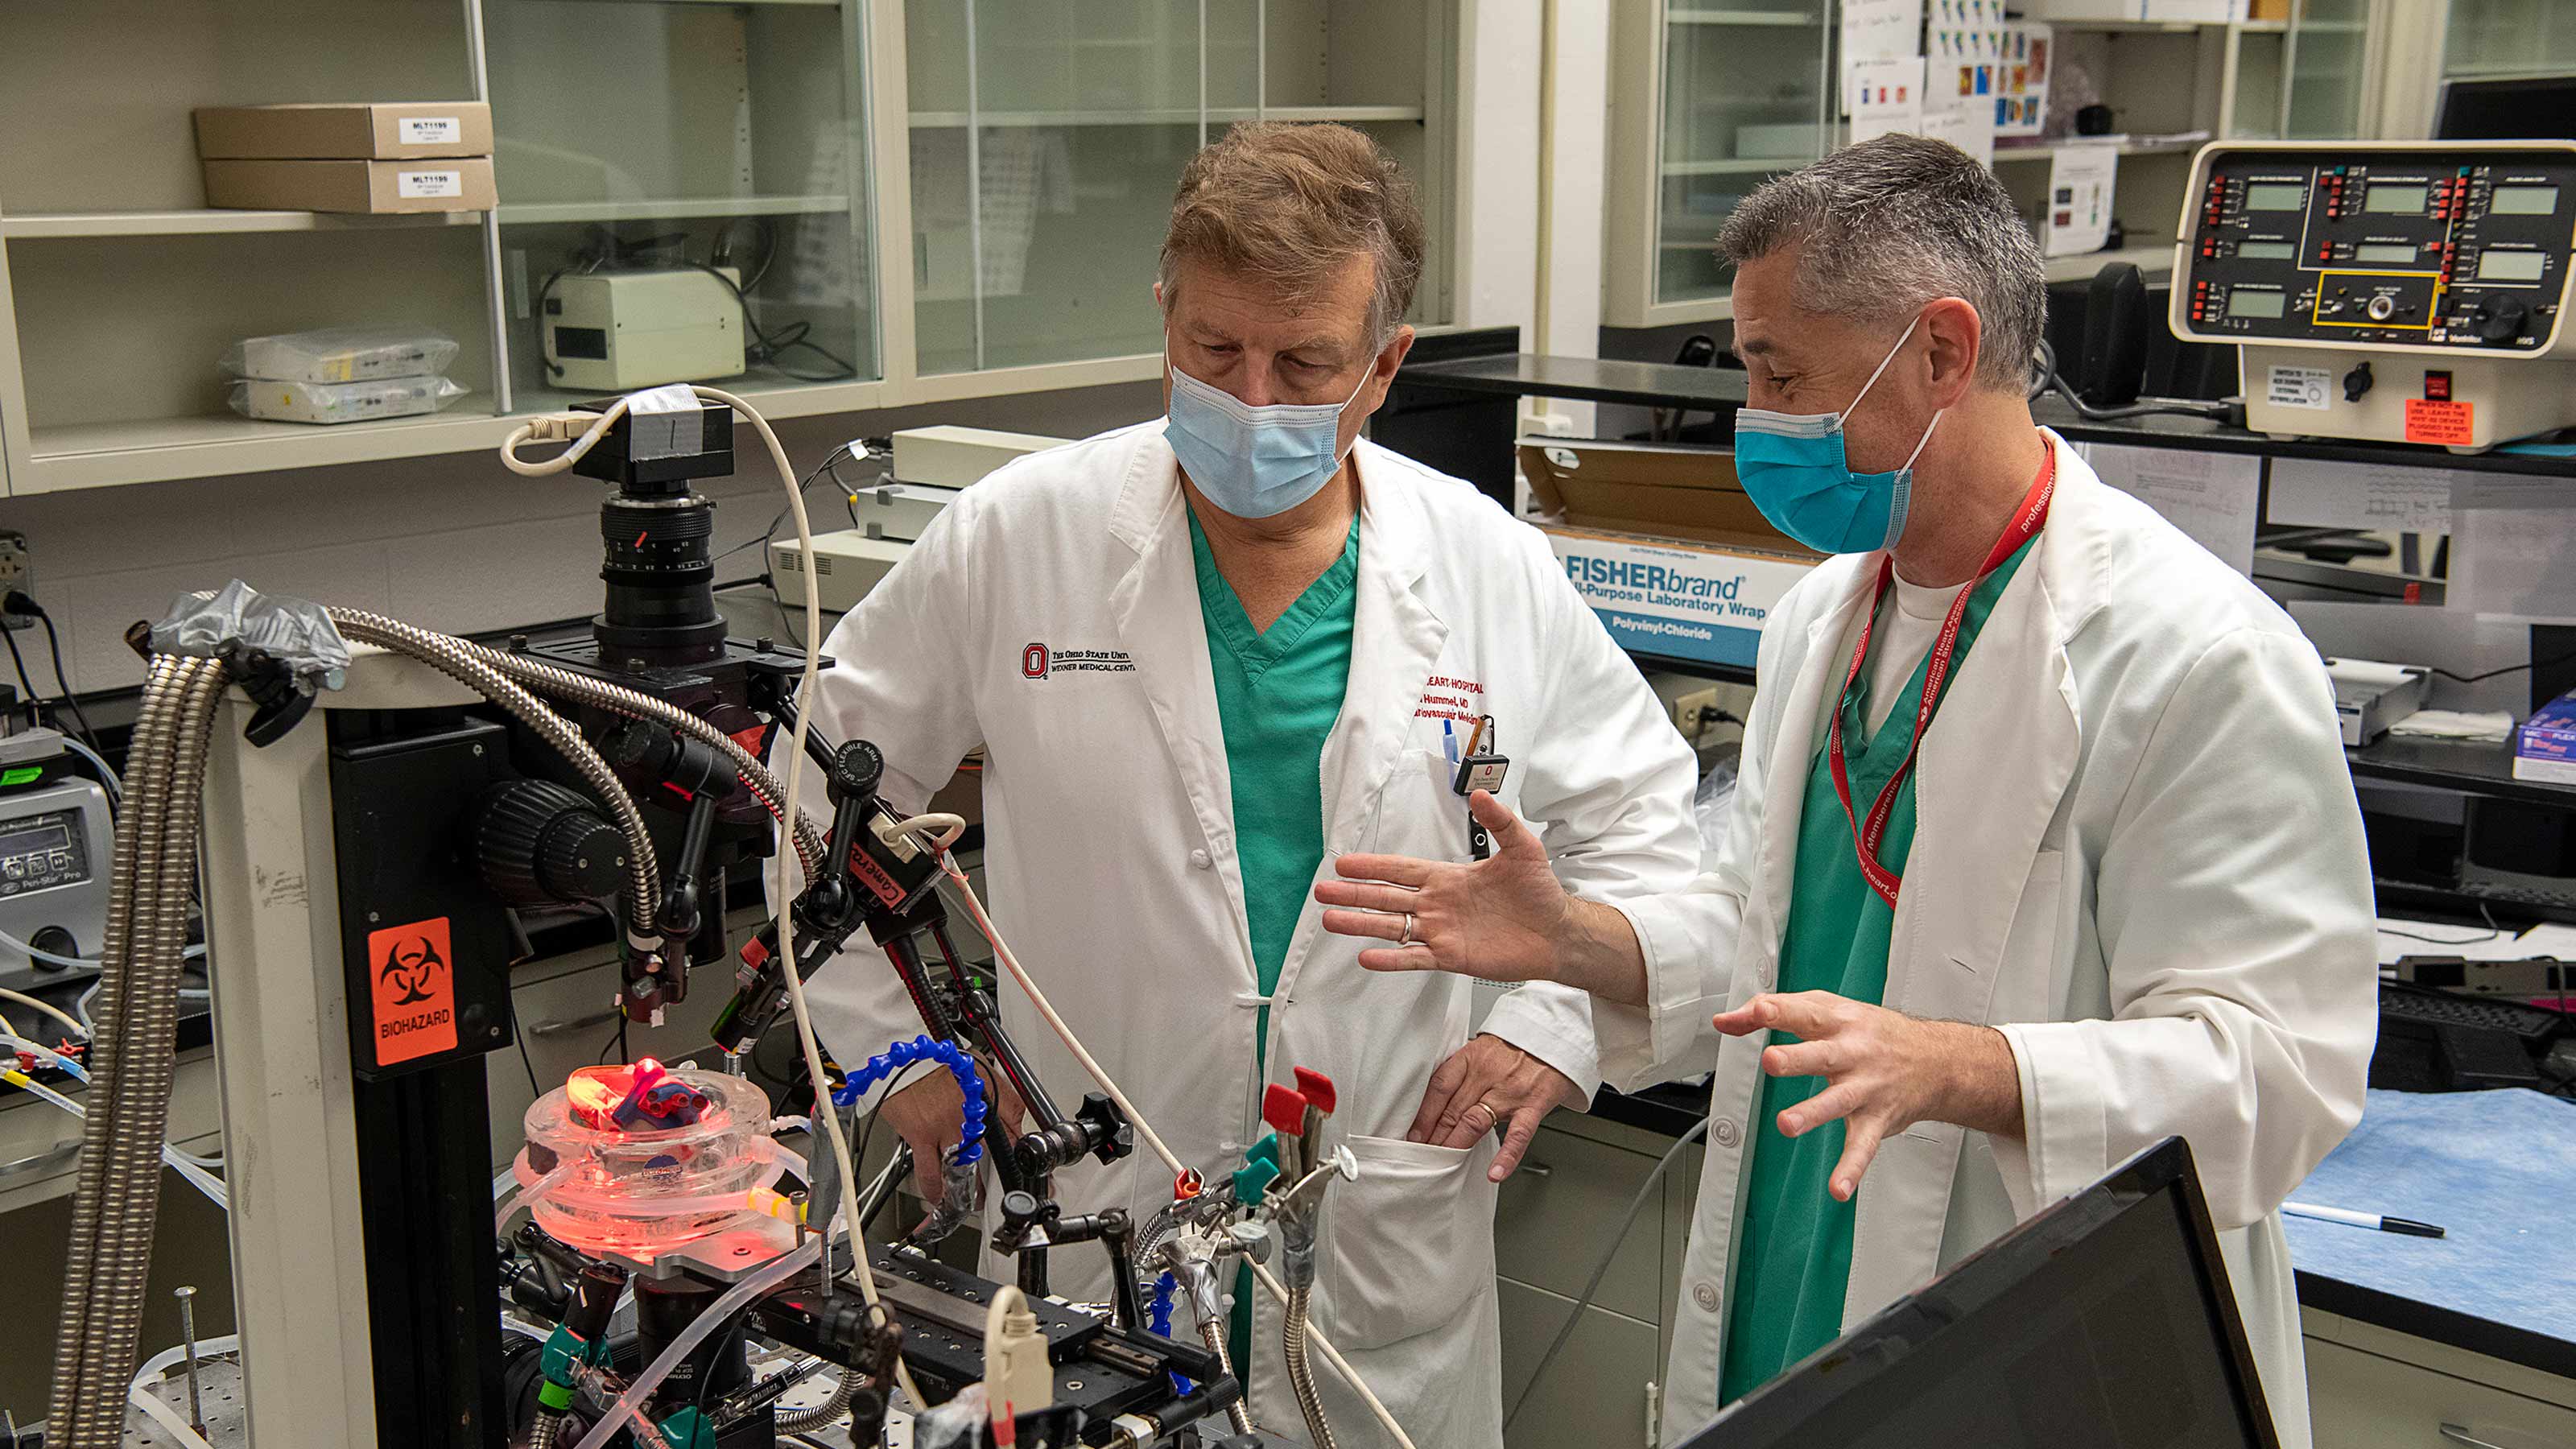 Dr. Federov and Dr. Hummel working together in their lab